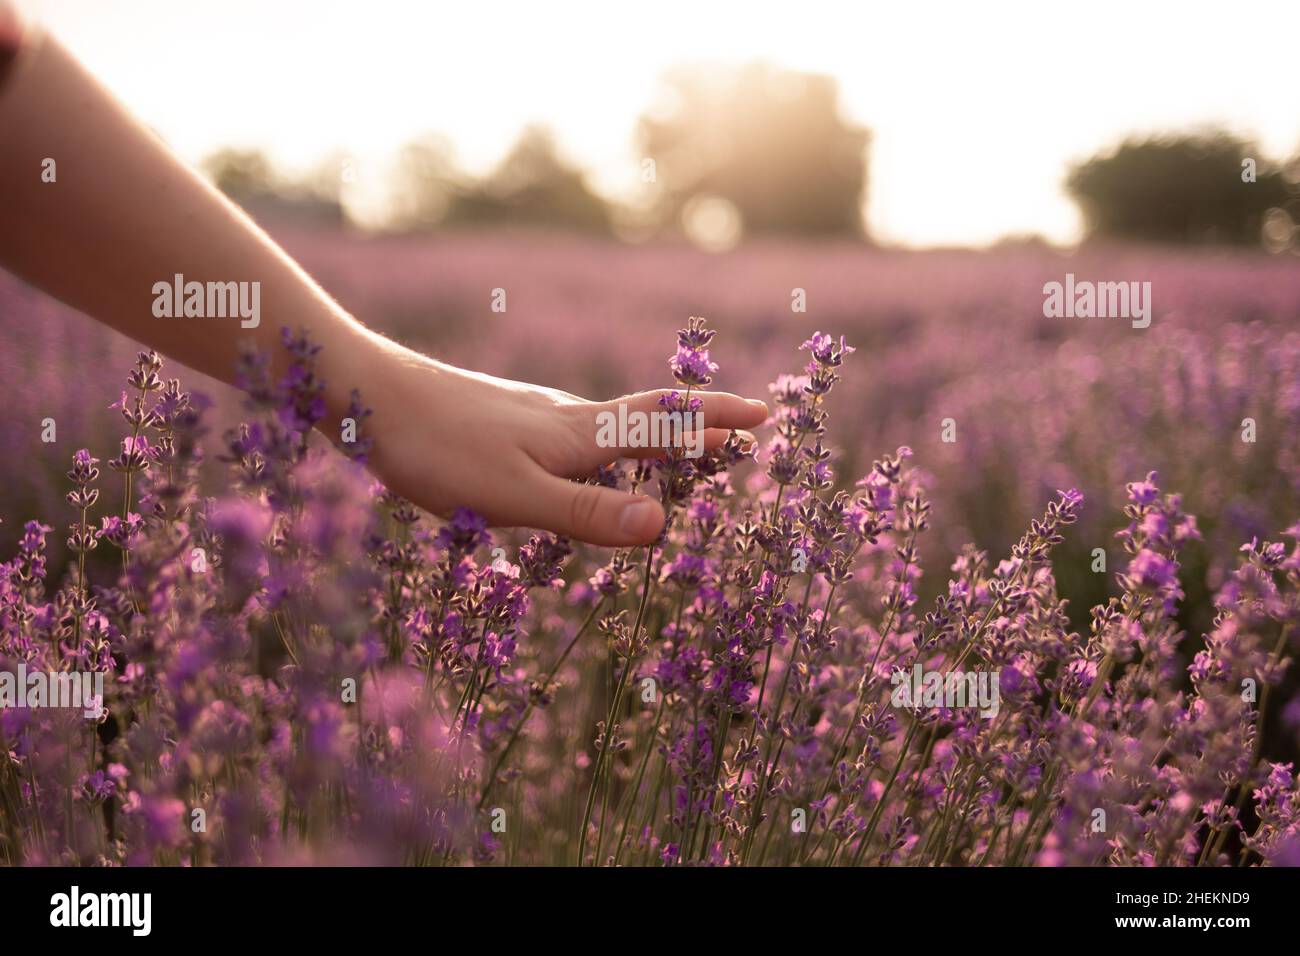 Woman's hand touching lavender on the field feeling nature. Summer evening and the girl's hand with lilac lavender flowers. Nature and relaxation Stock Photo